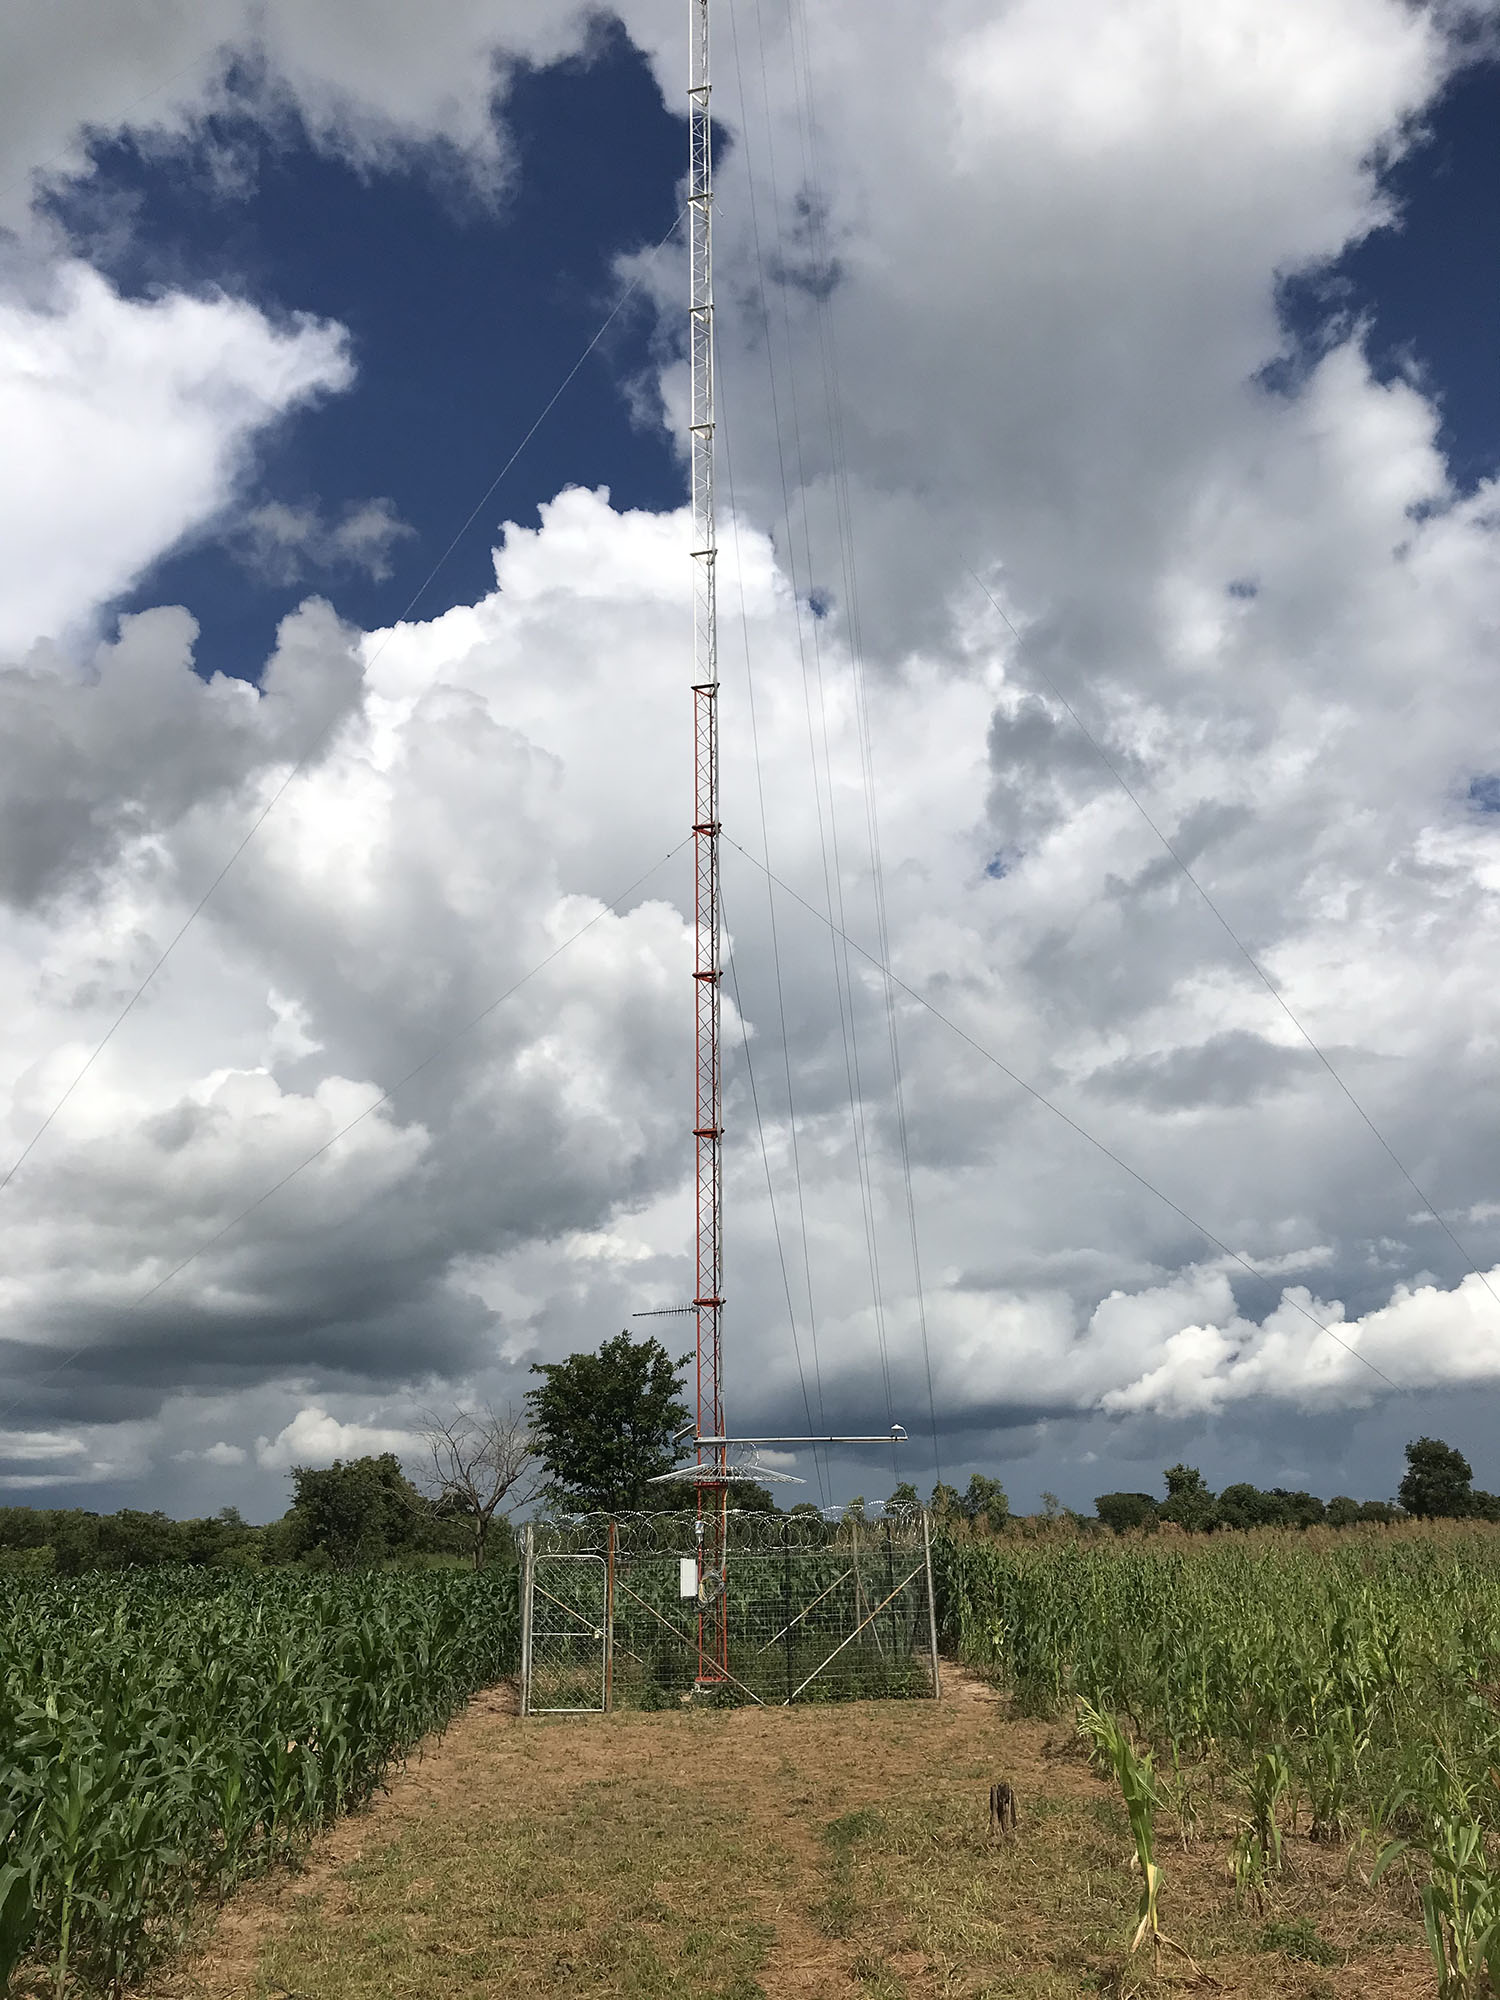 This met mast in a corn field provides revenue to the farmer and hope for electricity and economic development in the future.